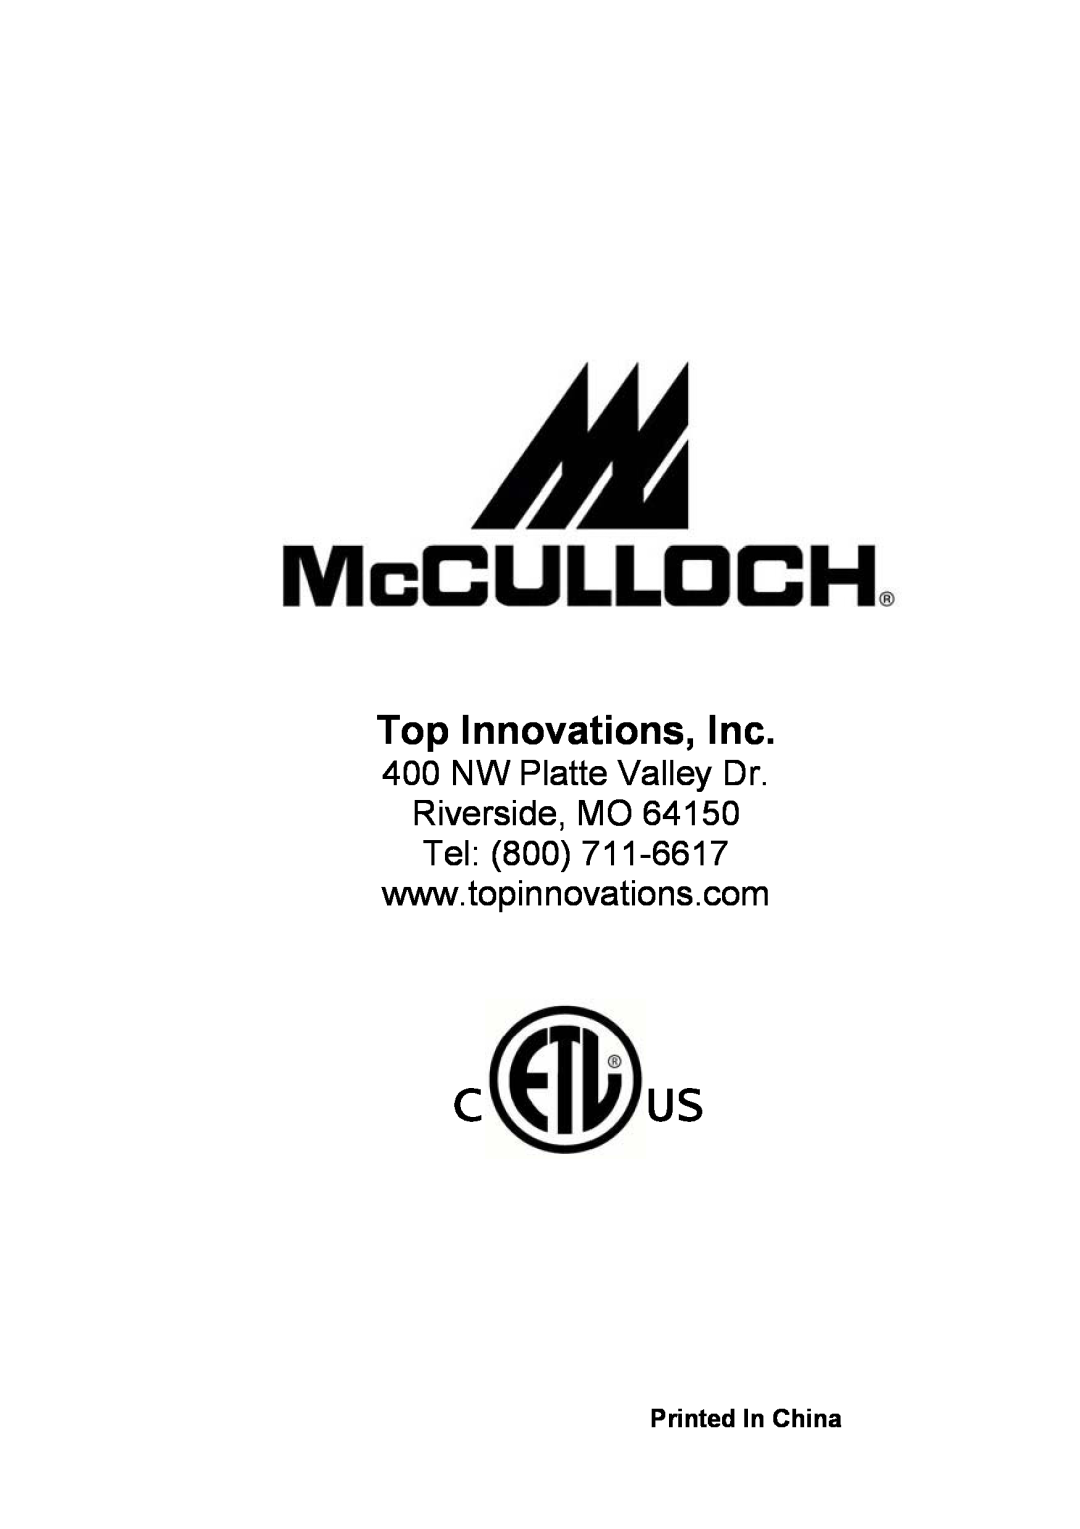 Top Innovations MC1910 warranty Top Innovations, Inc, C Us, NW Platte Valley Dr 